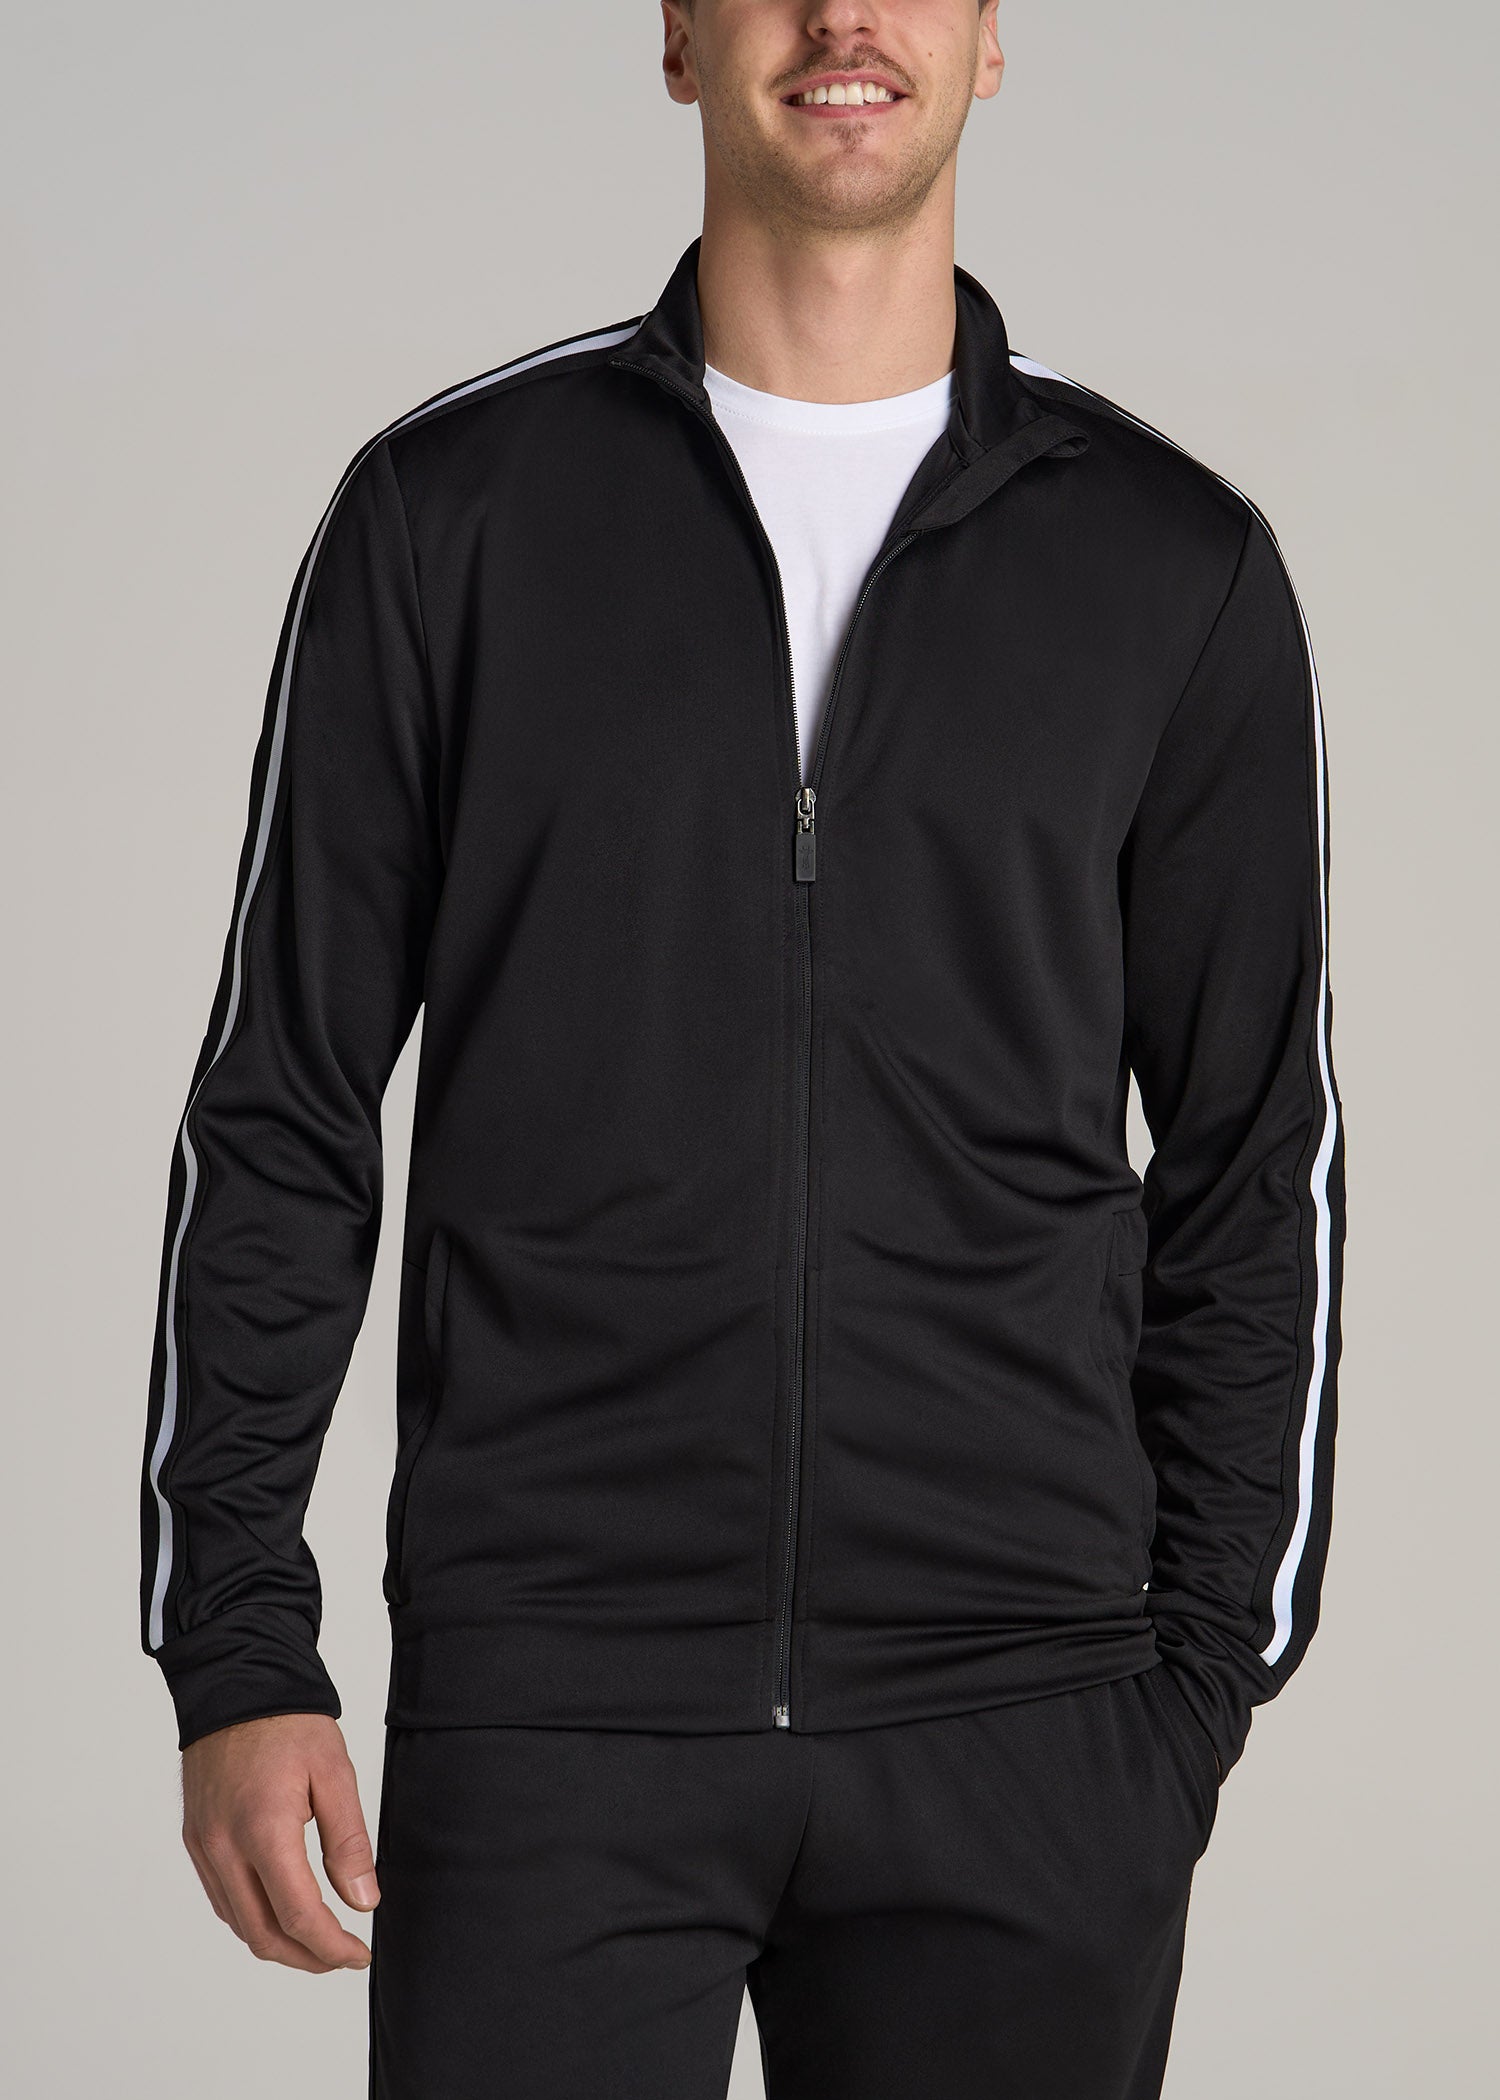 Tall Men's Athletic Black Jacket With White Stripes | American Tall